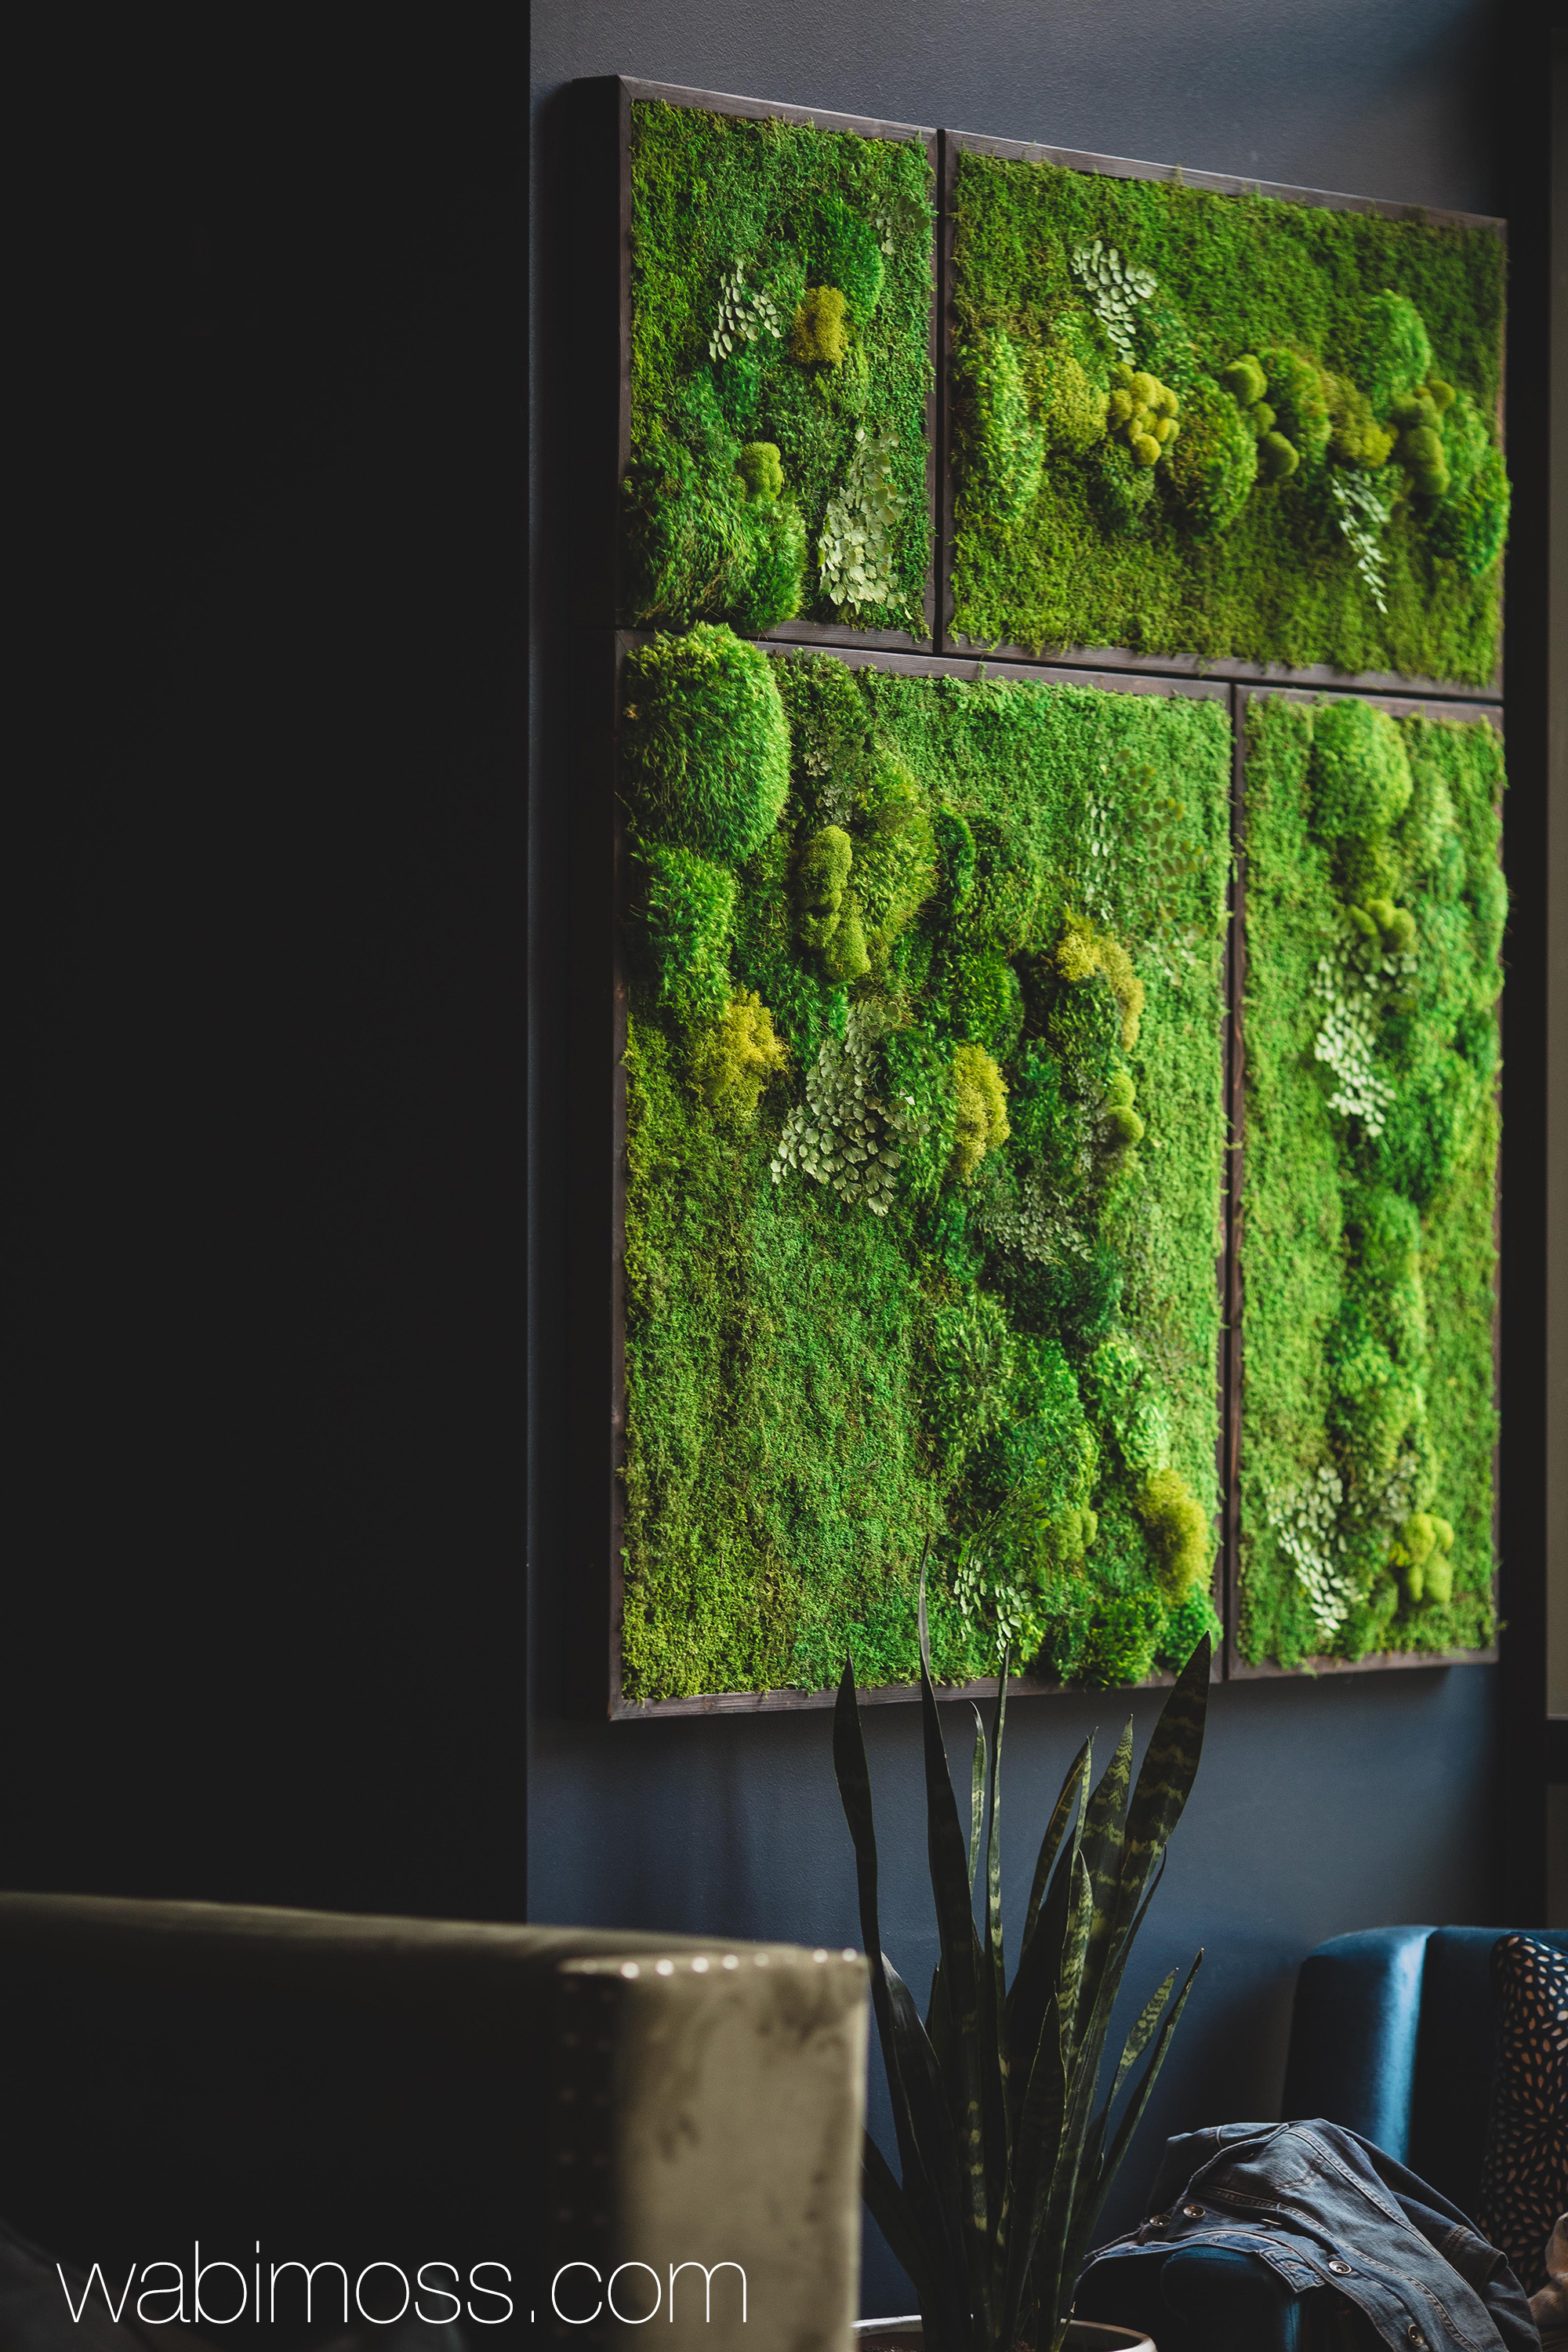 58x58" Real Preserved Moss Wall Art Green Wall Collage No ...